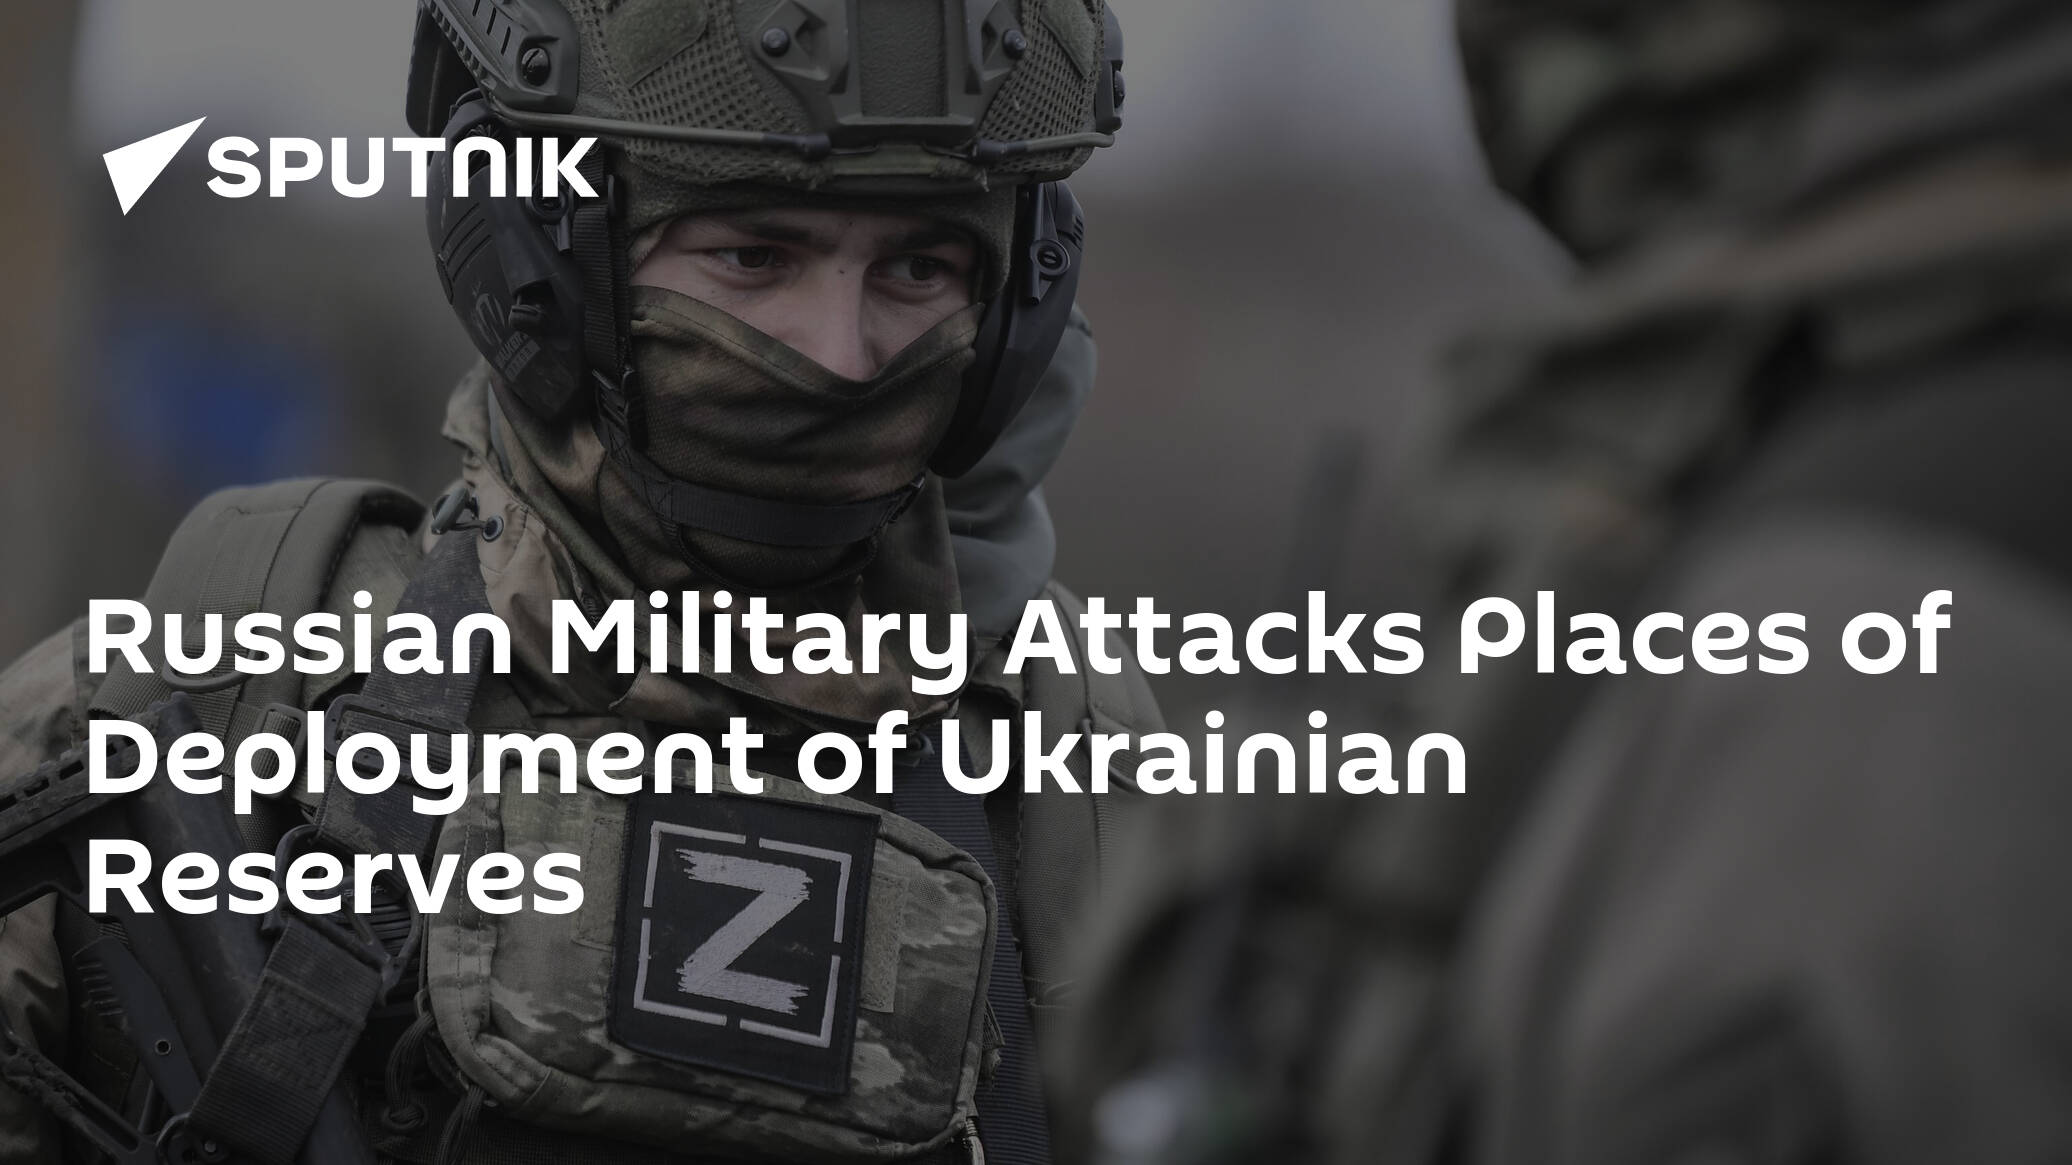 Russian Military Attacks Places of Deployment of Ukrainian Reserves